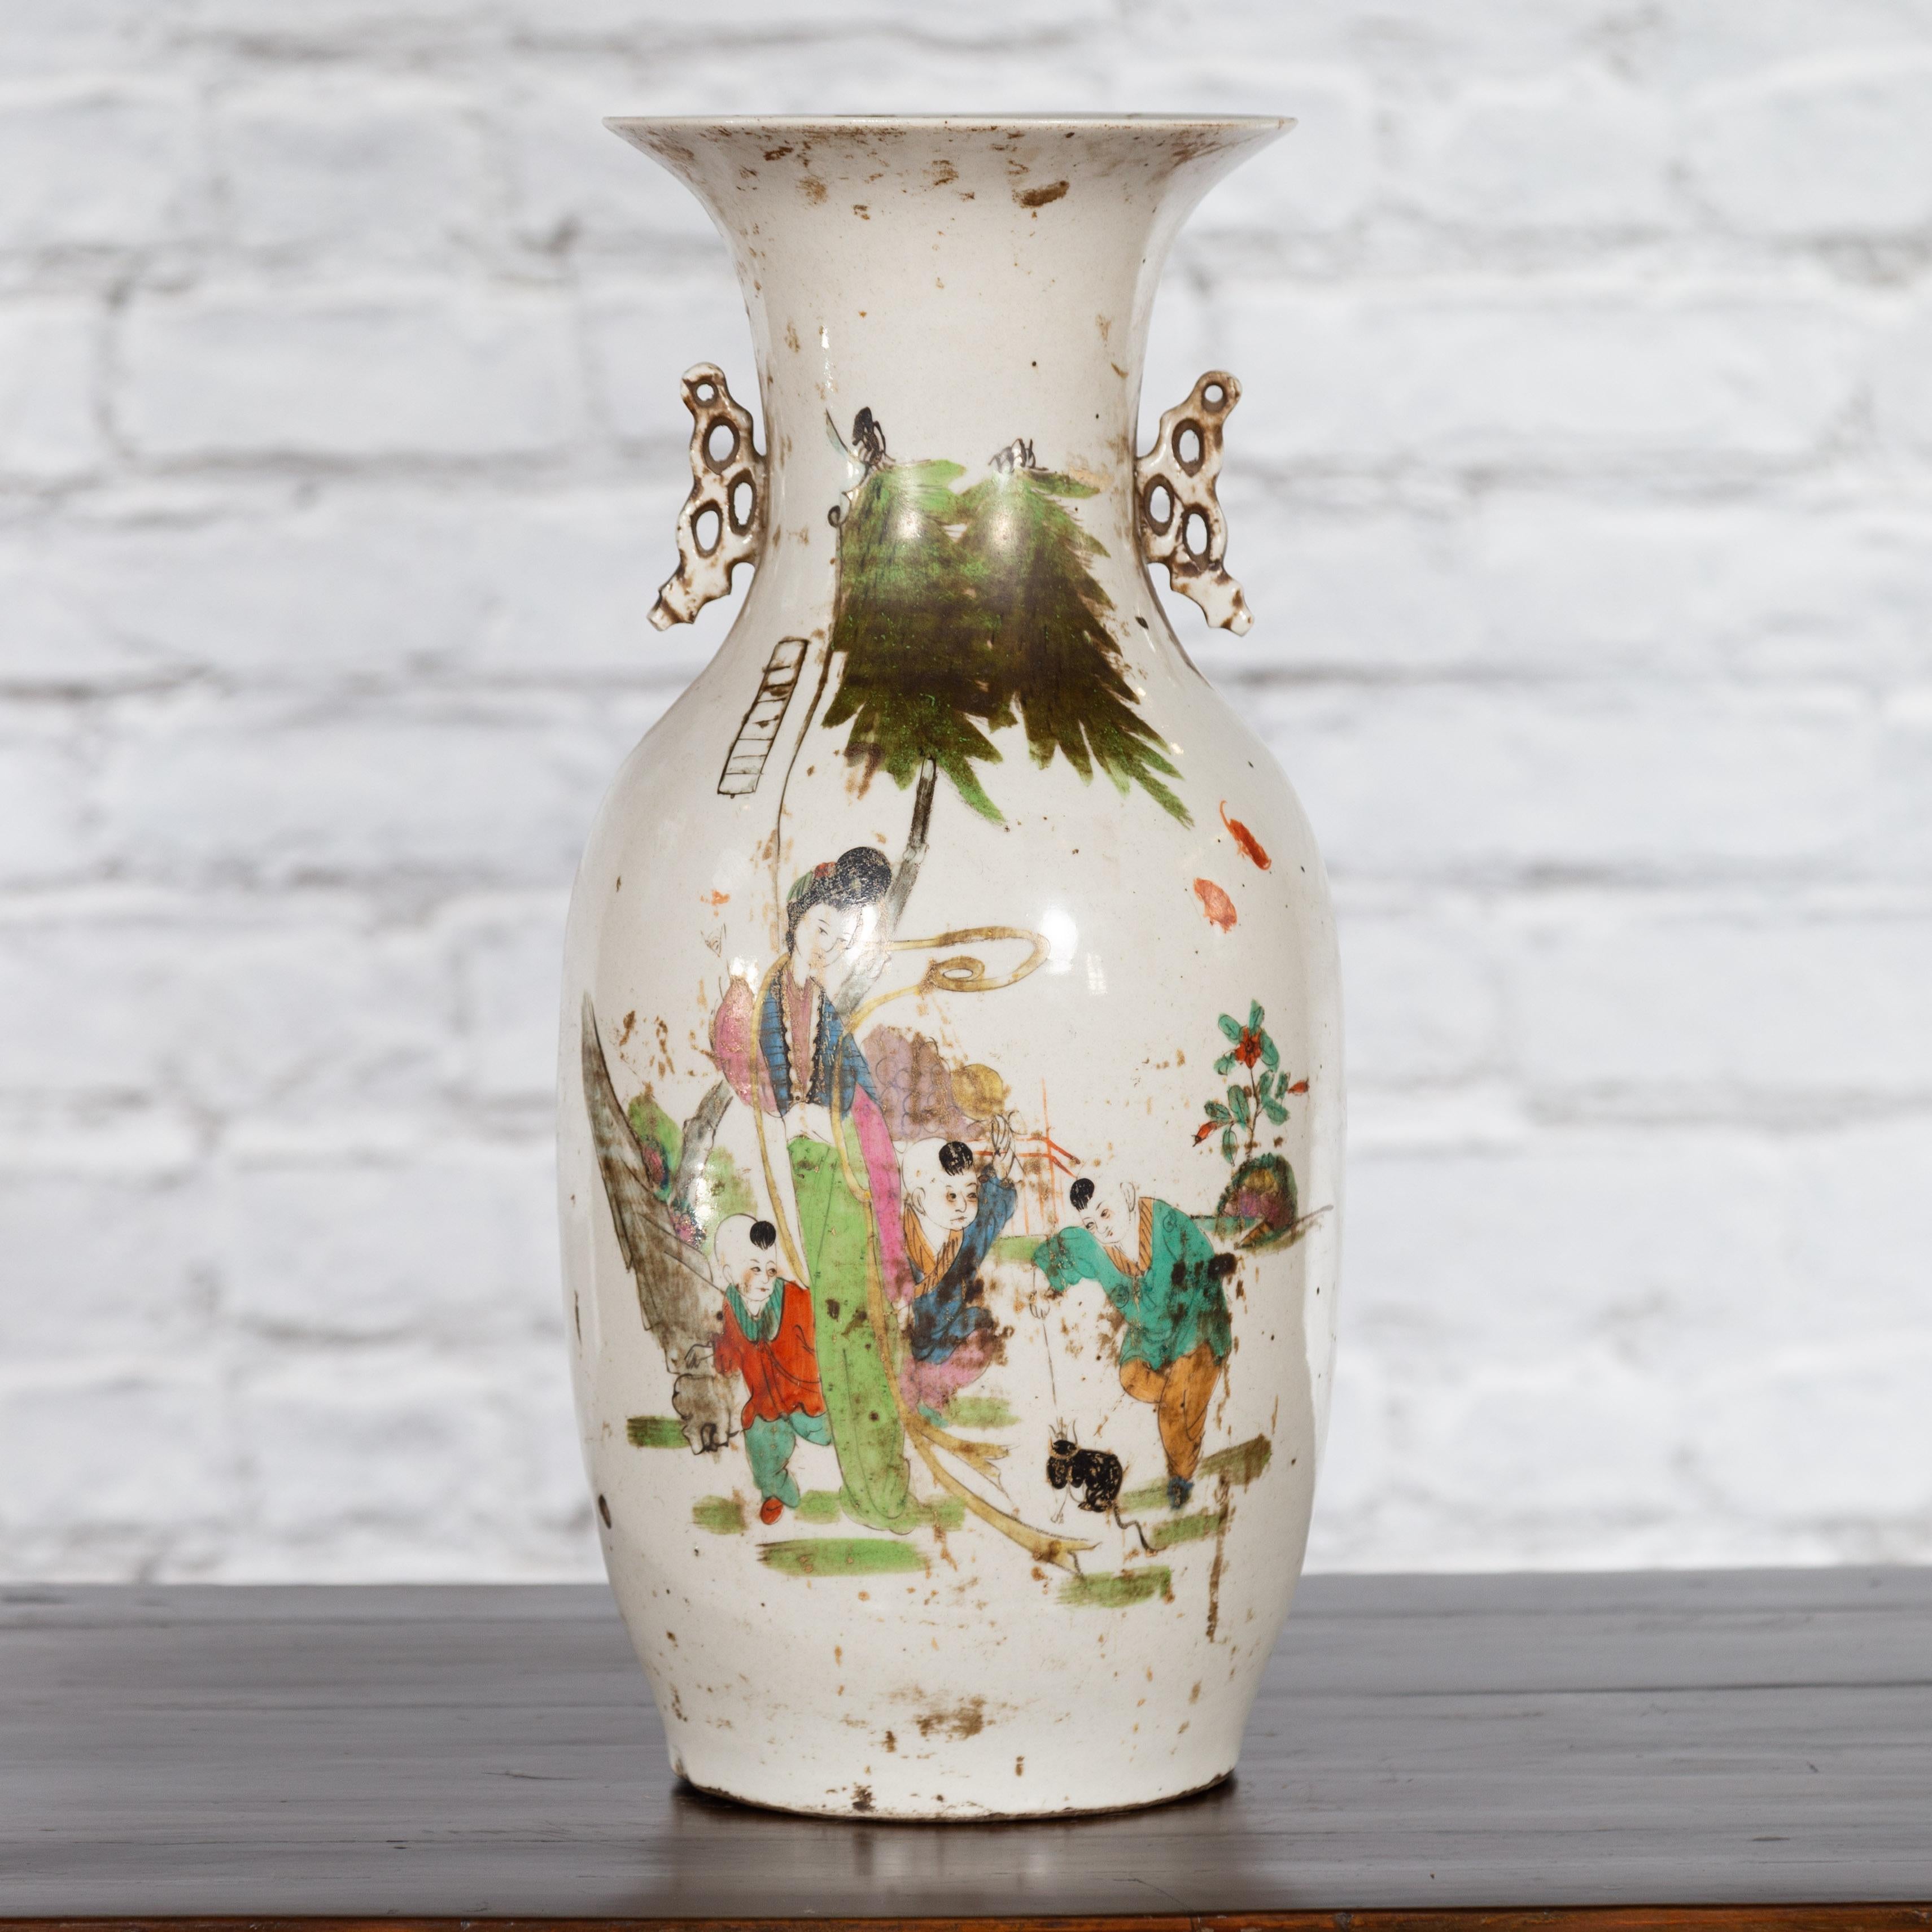 Chinese Porcelain Vase with Hand-Painted Figures and Calligraphy Motifs In Good Condition For Sale In Yonkers, NY